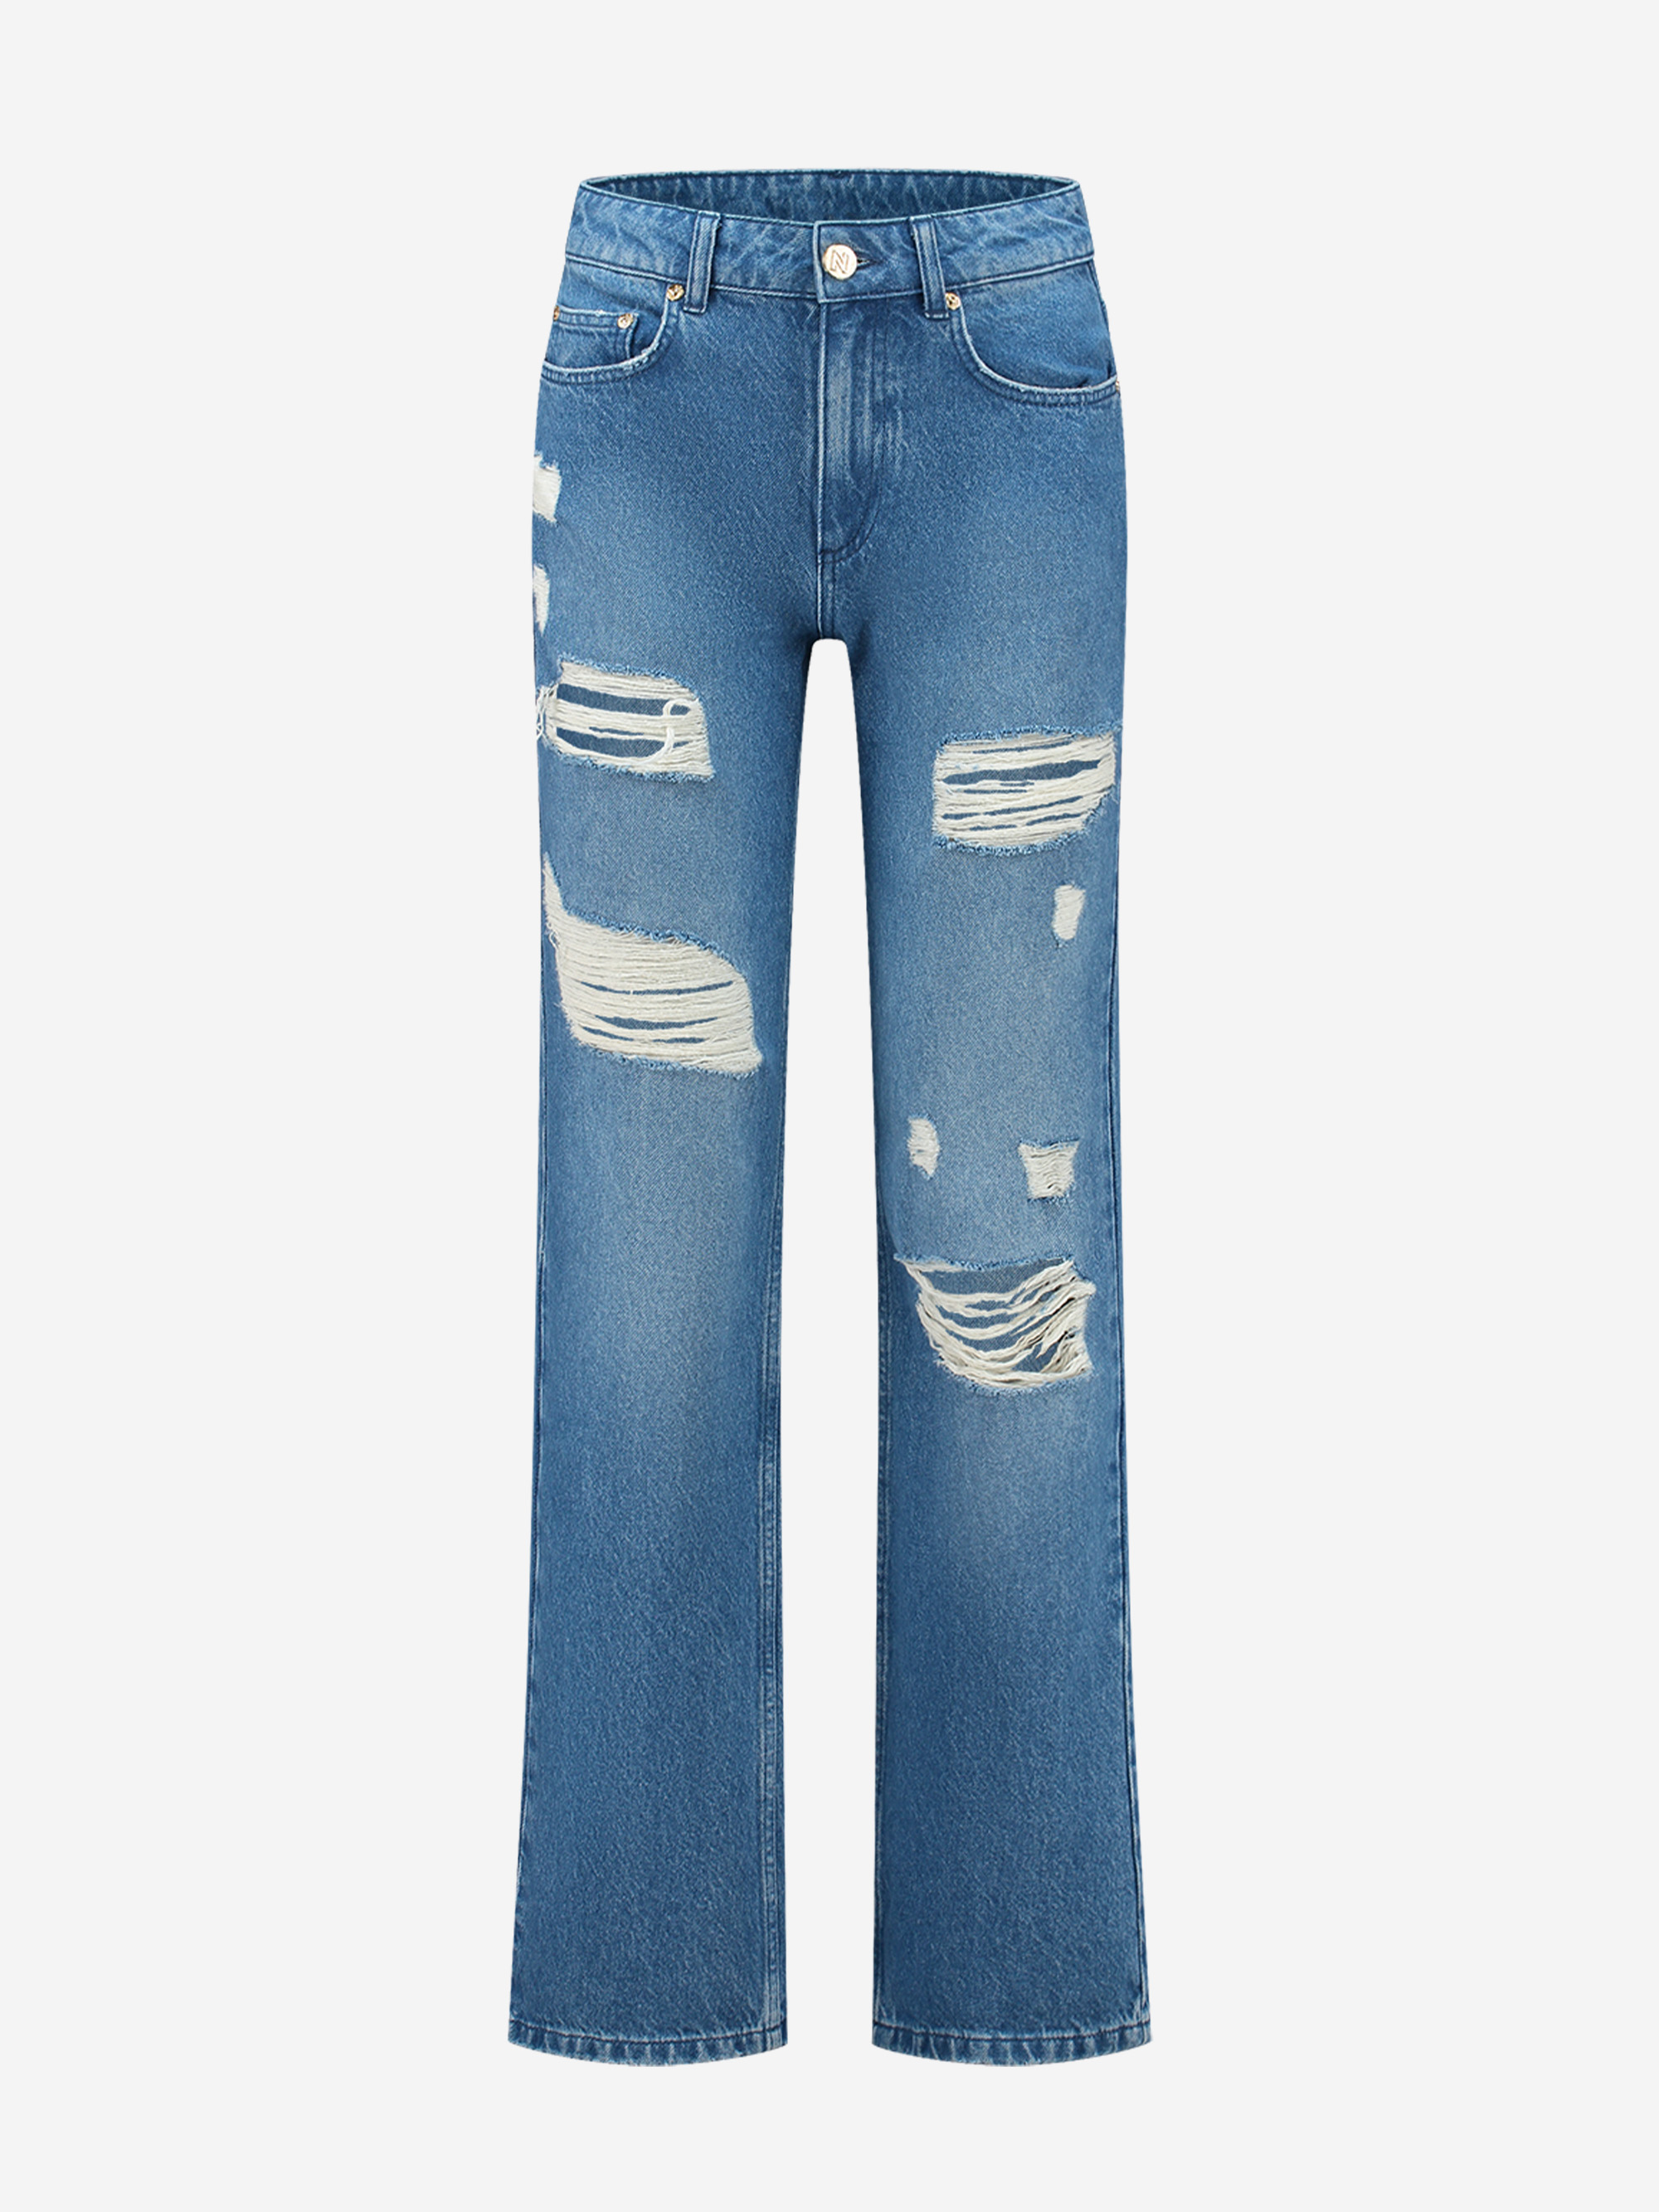 Denim jeans with detail